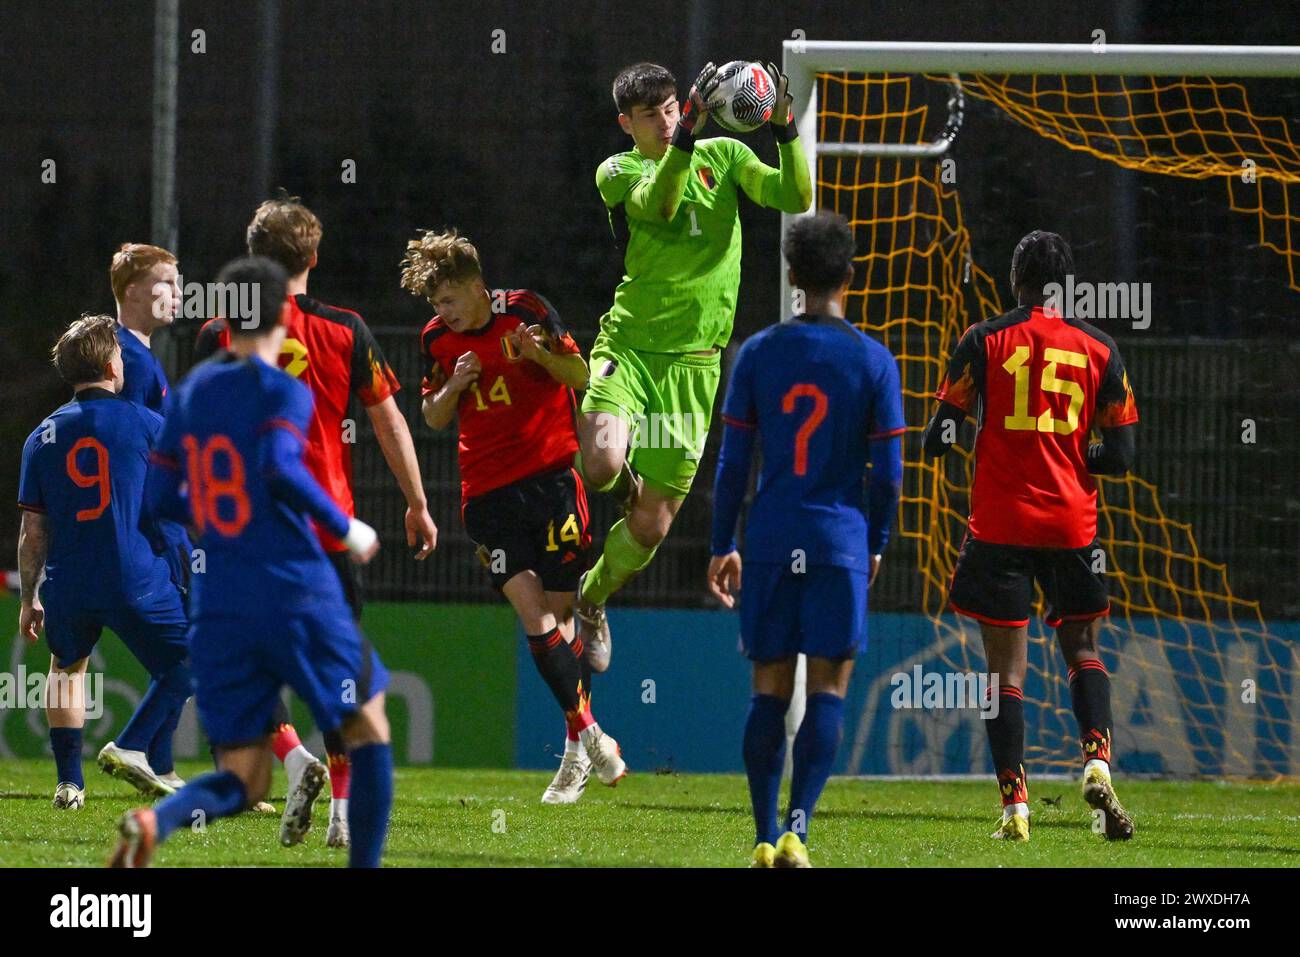 Arthur Piedfort (14) of Belgium and goalkeeper Mike Penders (1) of Belgium pictured in action during a soccer game between the national under 19 teams of Belgium and The Netherlands on matchday 3 in group 2 of the UEFA Under-19 Elite round on Thursday 26 March 2024  in Veendam , The Netherlands . PHOTO SPORTPIX | David Catry Stock Photo